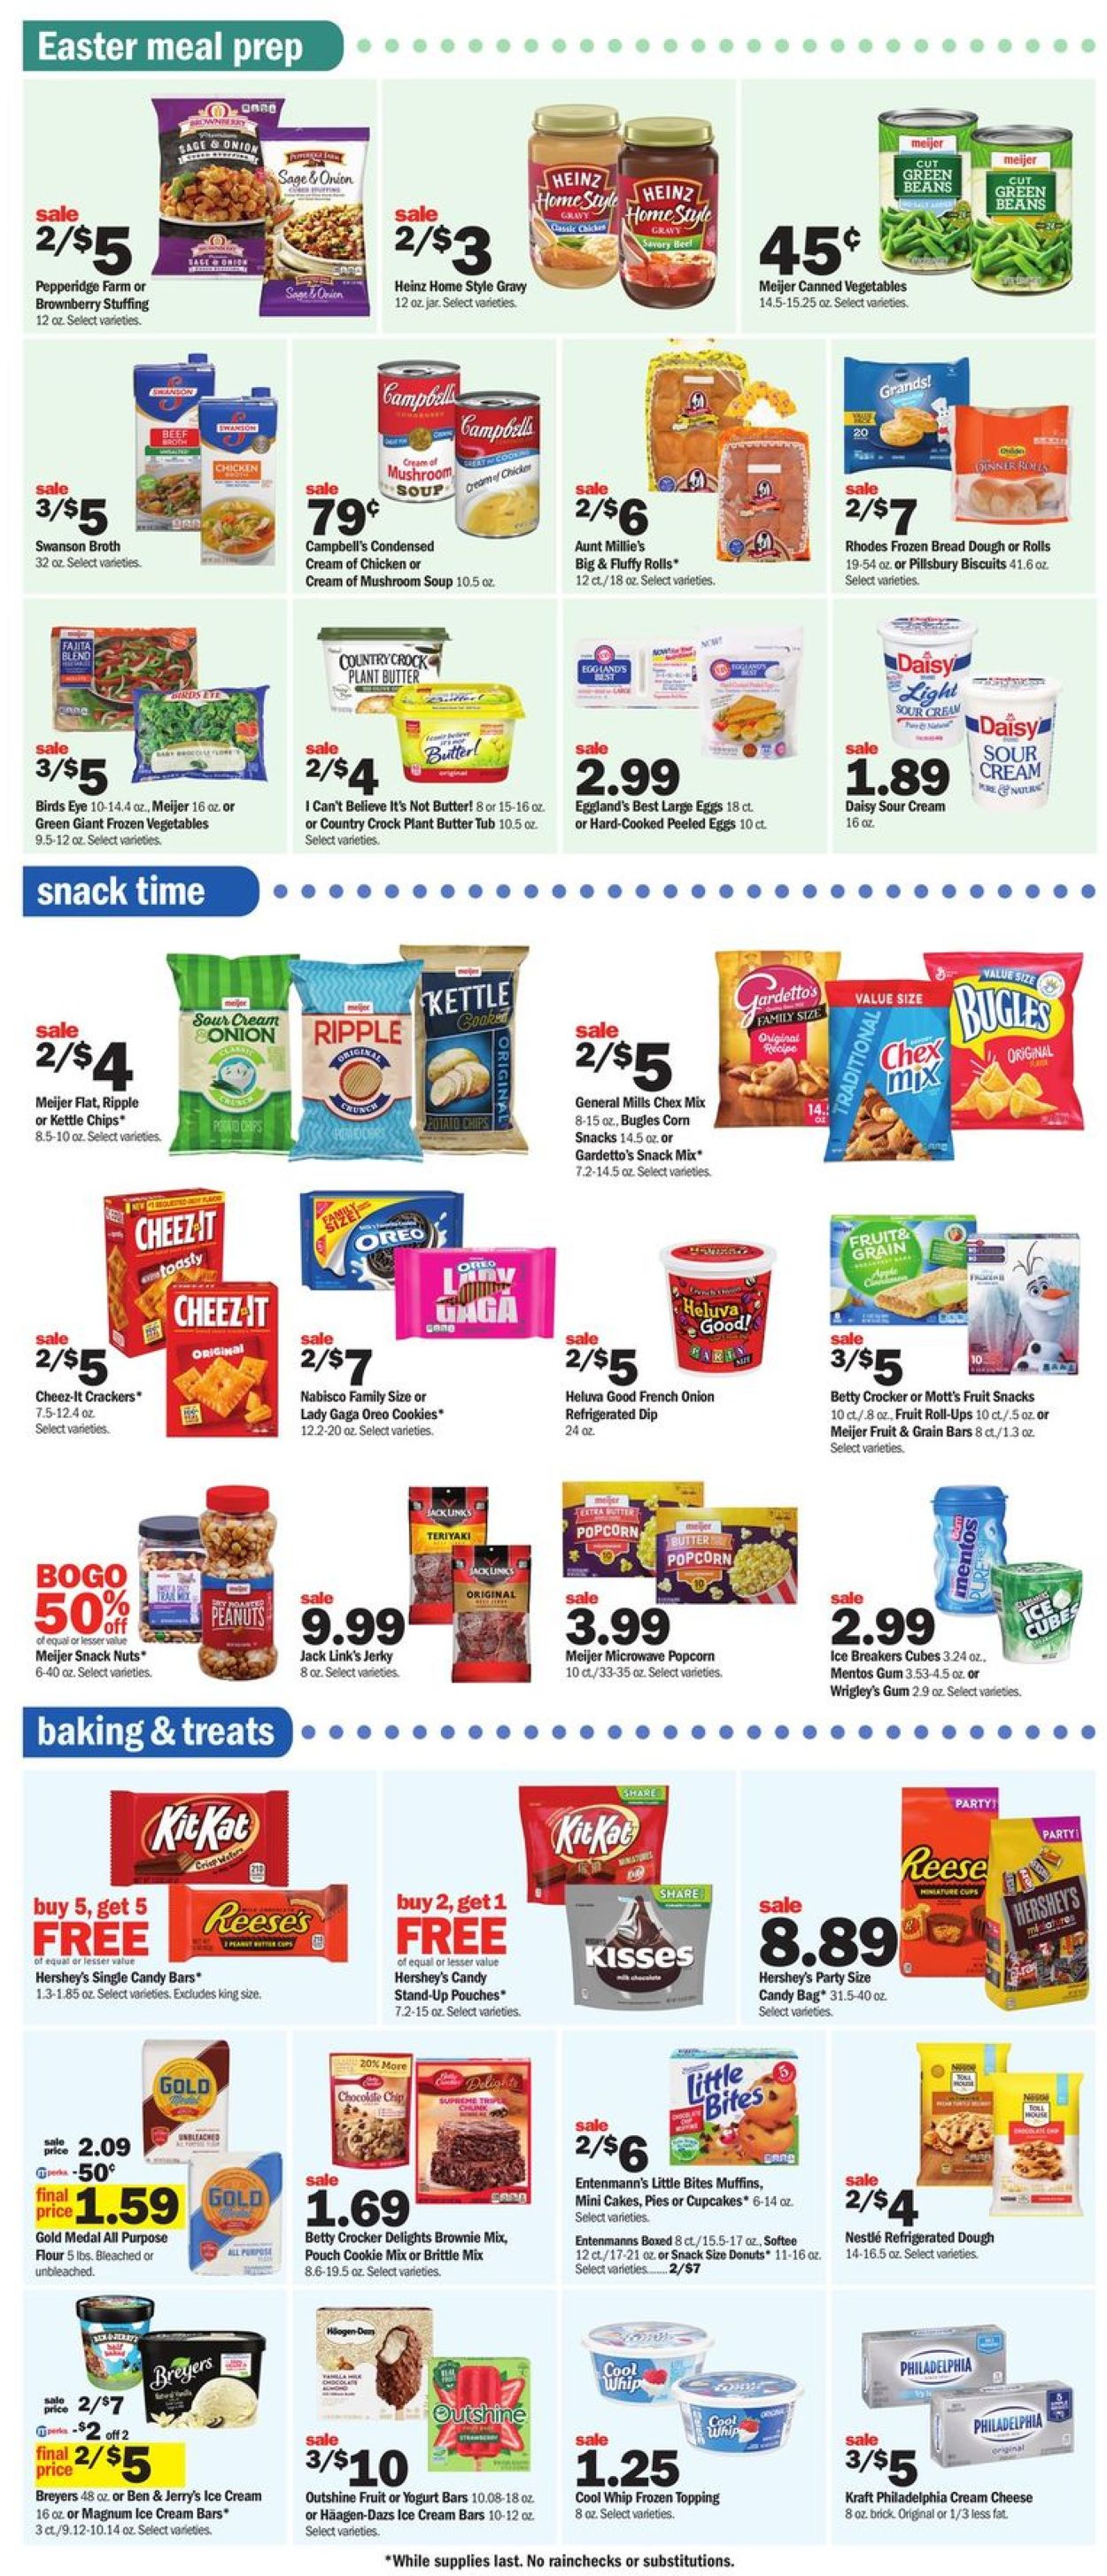 Meijer - Easter 2021 ad Weekly Ad Circular - valid 03/28-04/03/2021 (Page 4)